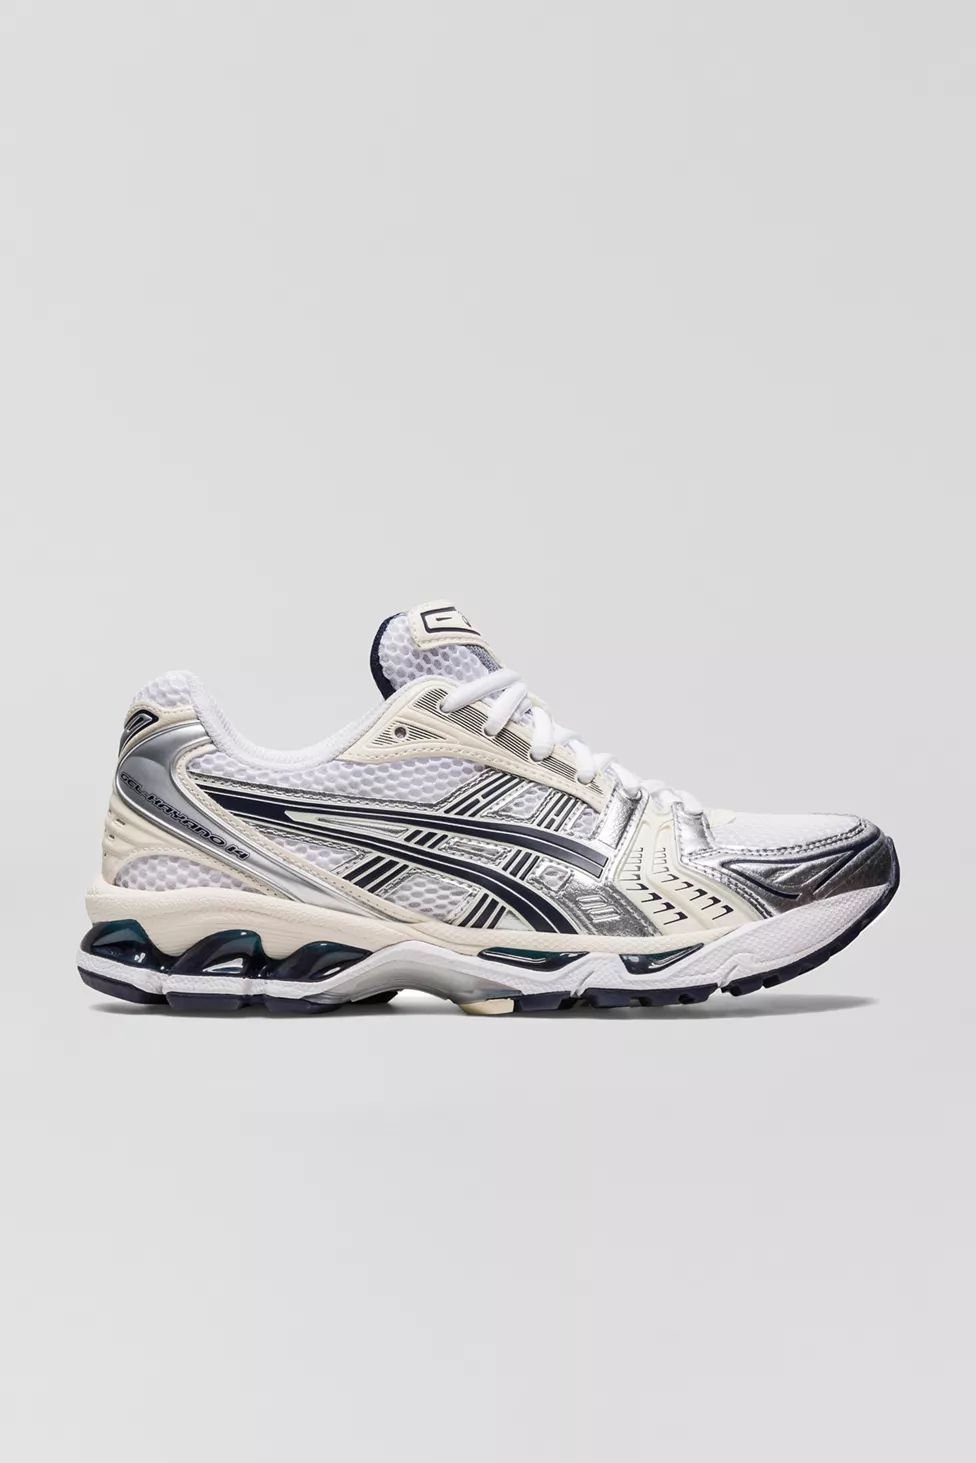 ASICS GEL-Kayano 14 Sneaker | Urban Outfitters (US and RoW)